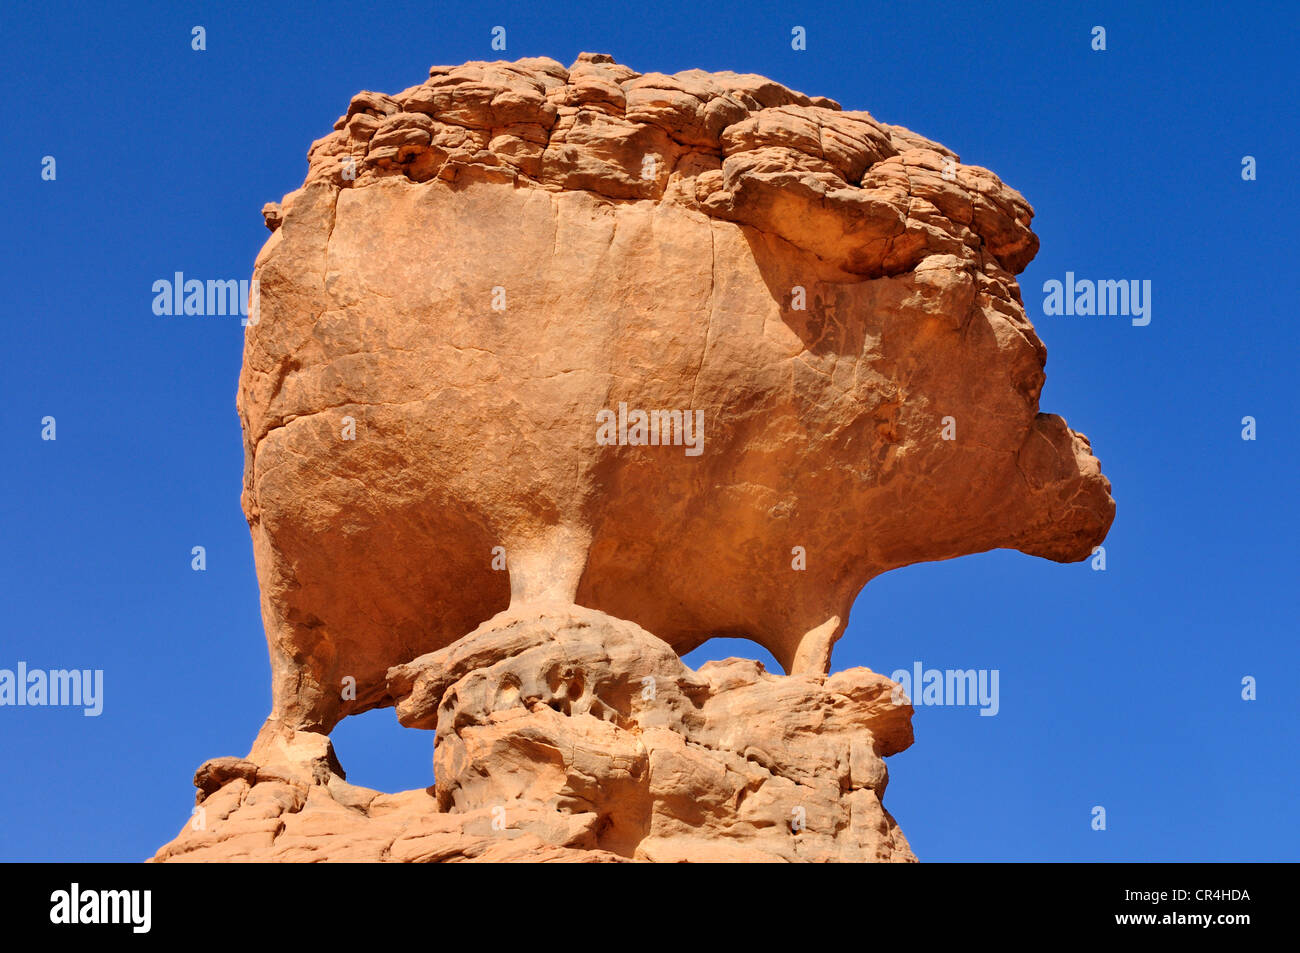 Rock formation in the shape of a hedgehog, Acacus Mountains or Tadrart Acacus range, Tassili n'Ajjer National Park Stock Photo